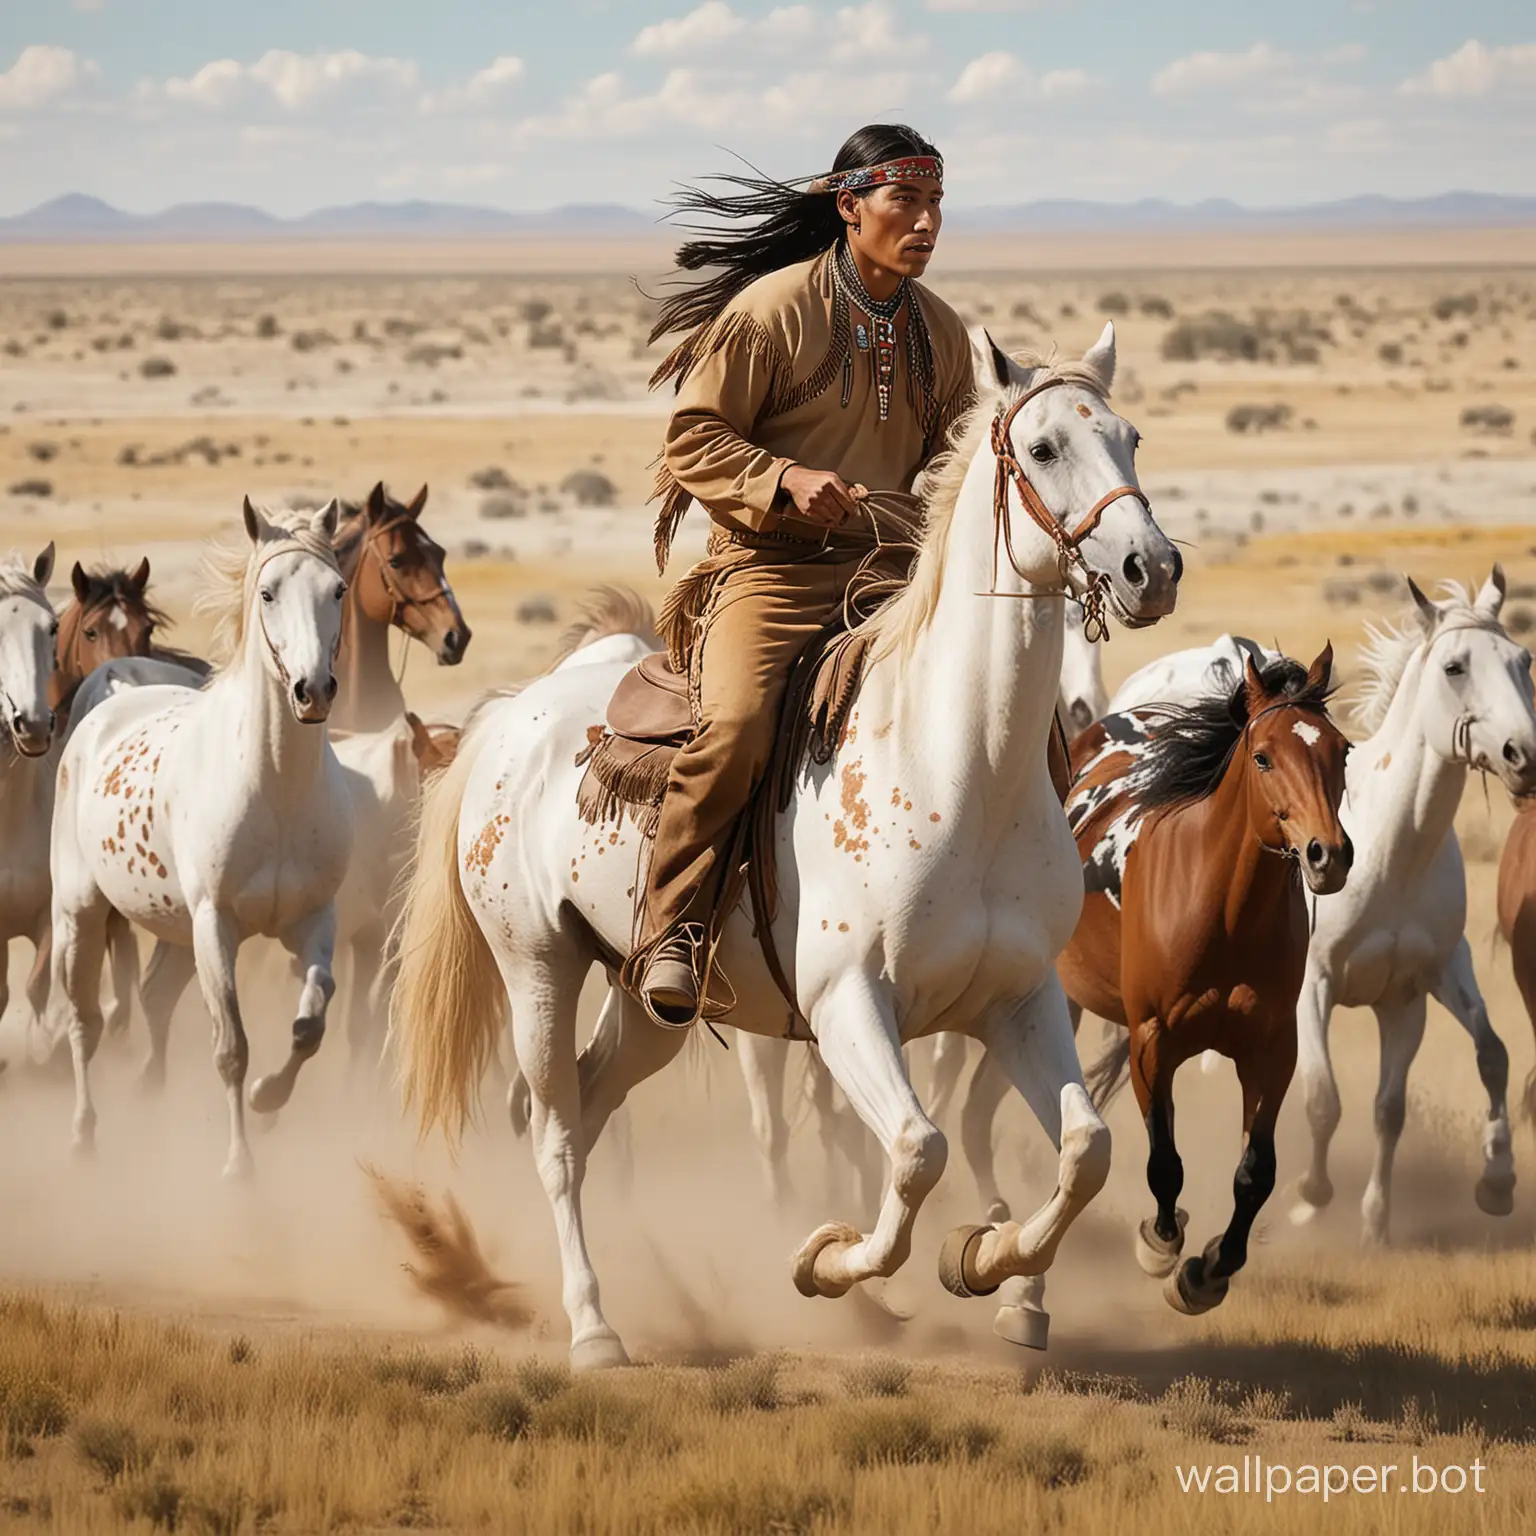 Native American riding a horse through the plains , a herd of paint horses galloping behind him